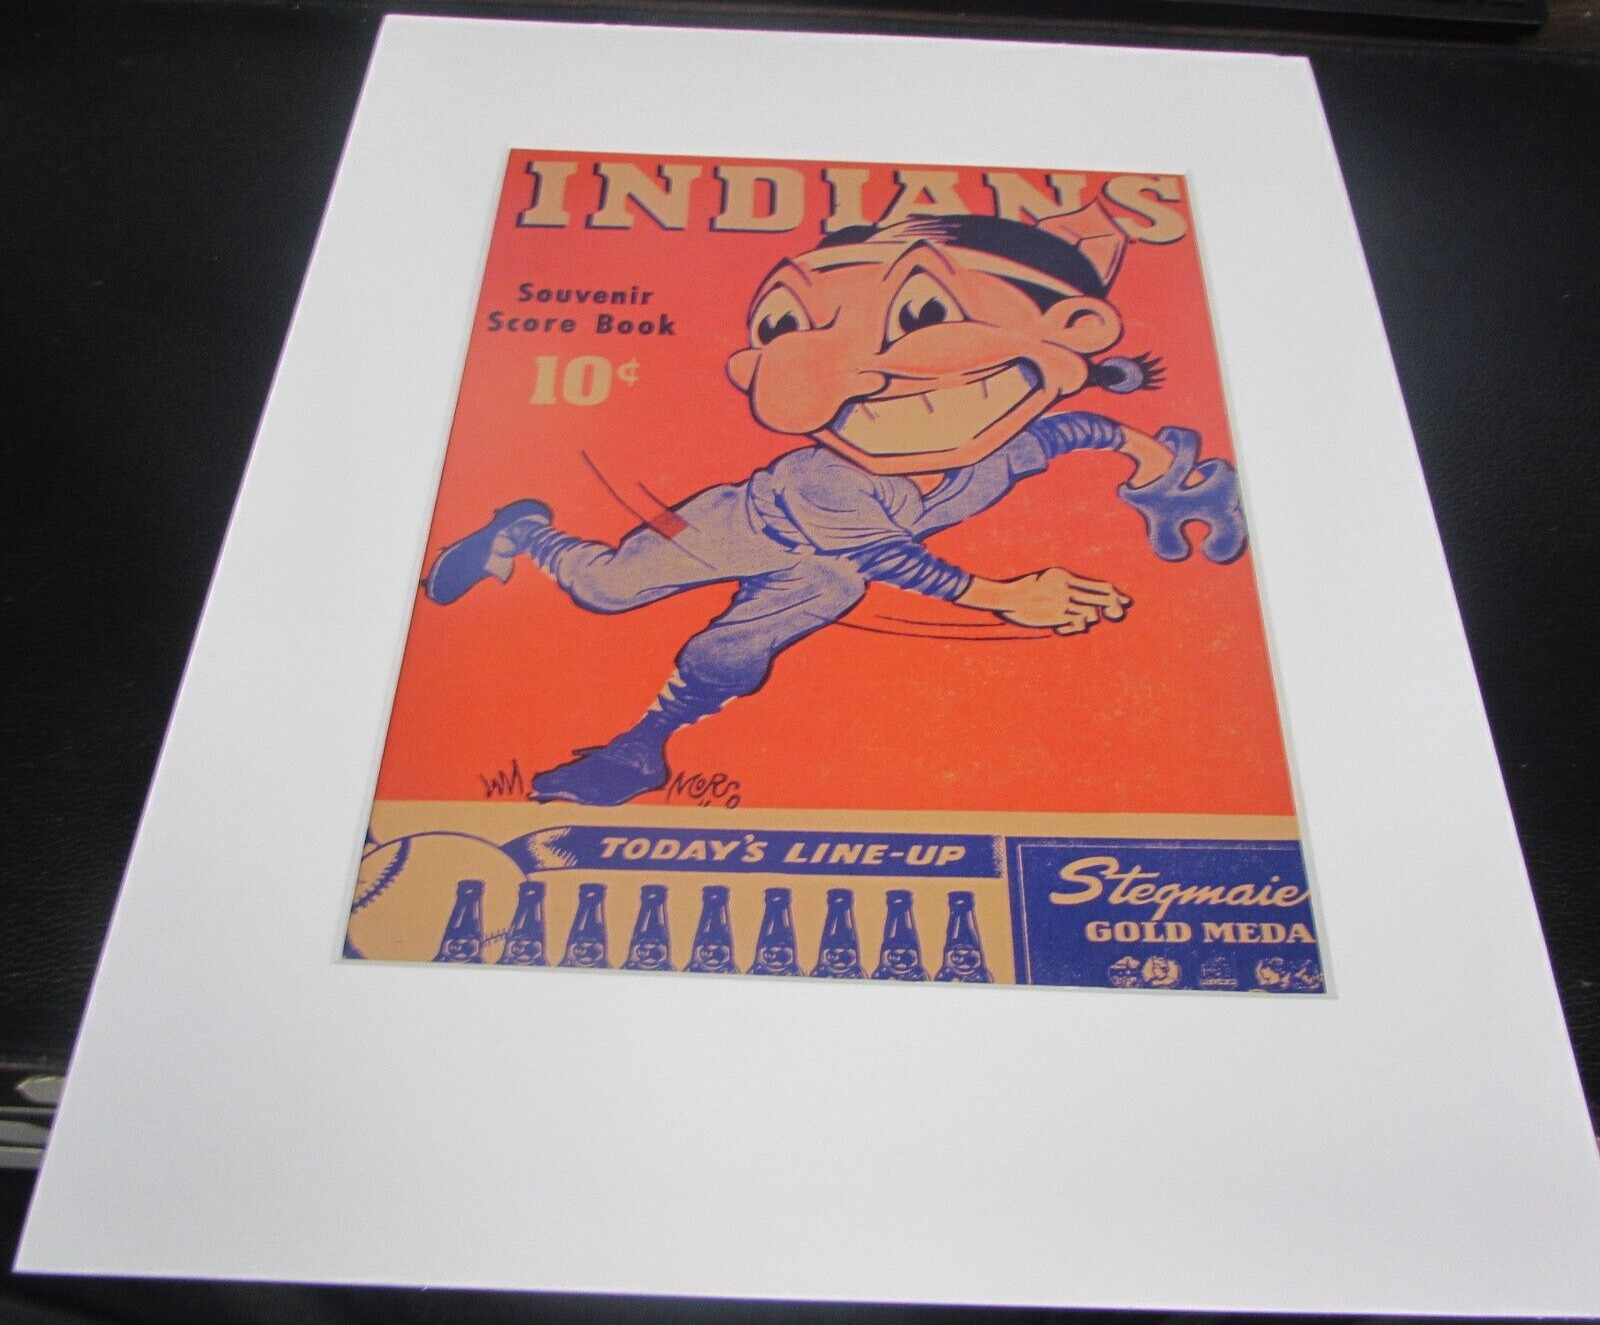 1949 WILKES-BARRE INDIANS PROGRAM - WILKES-BARRE PA  - PREMIUM MATTED PRINT #768